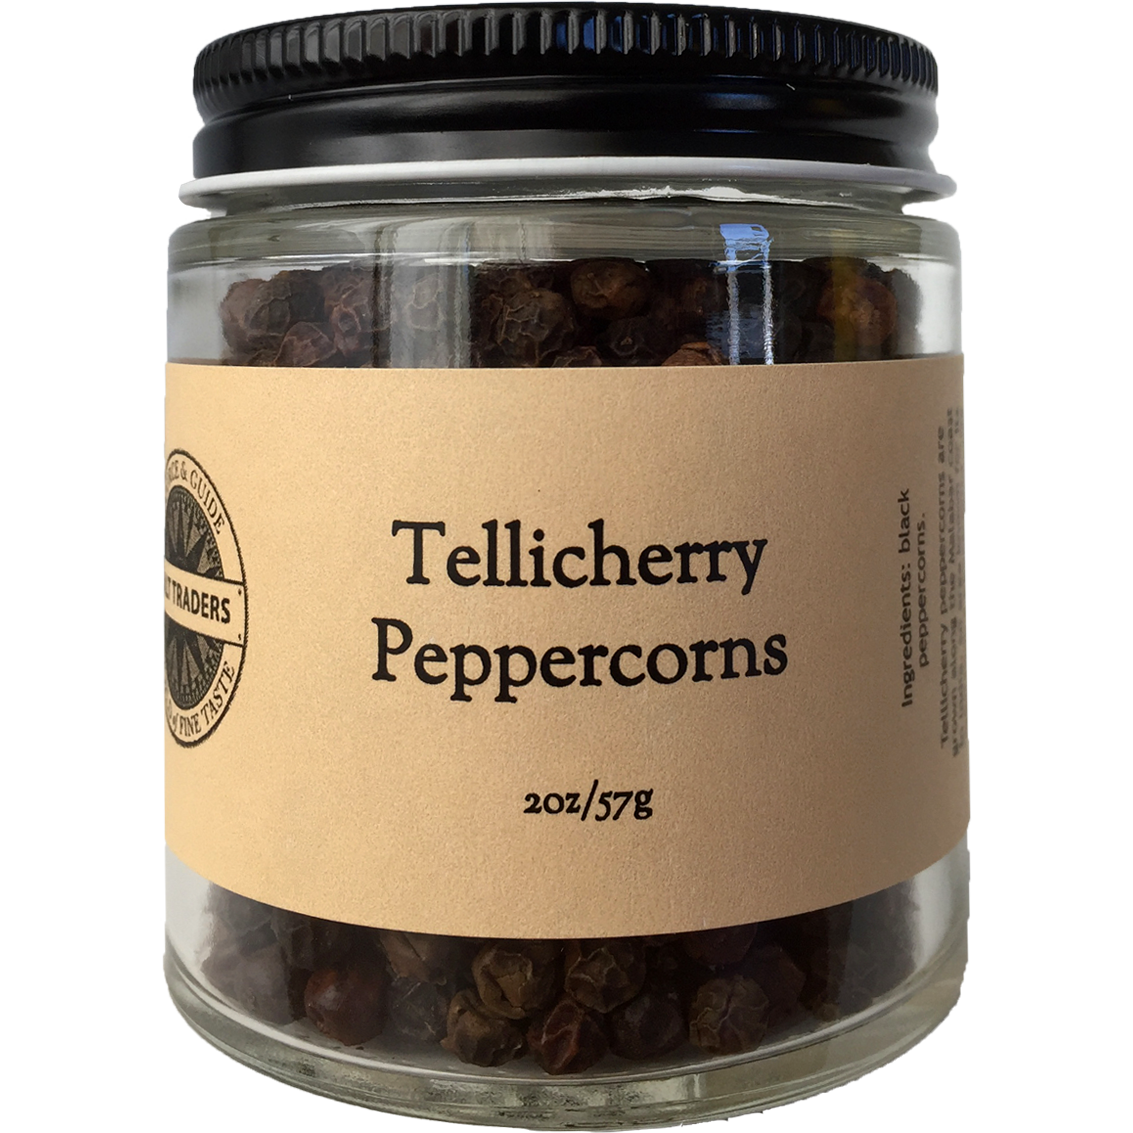 A glass jar with a black lid contains Tellicherry Black Pepper from Salt Traders, labeled 2oz/57g. These peppercorns hail from the Malabar Coast in Kerala.